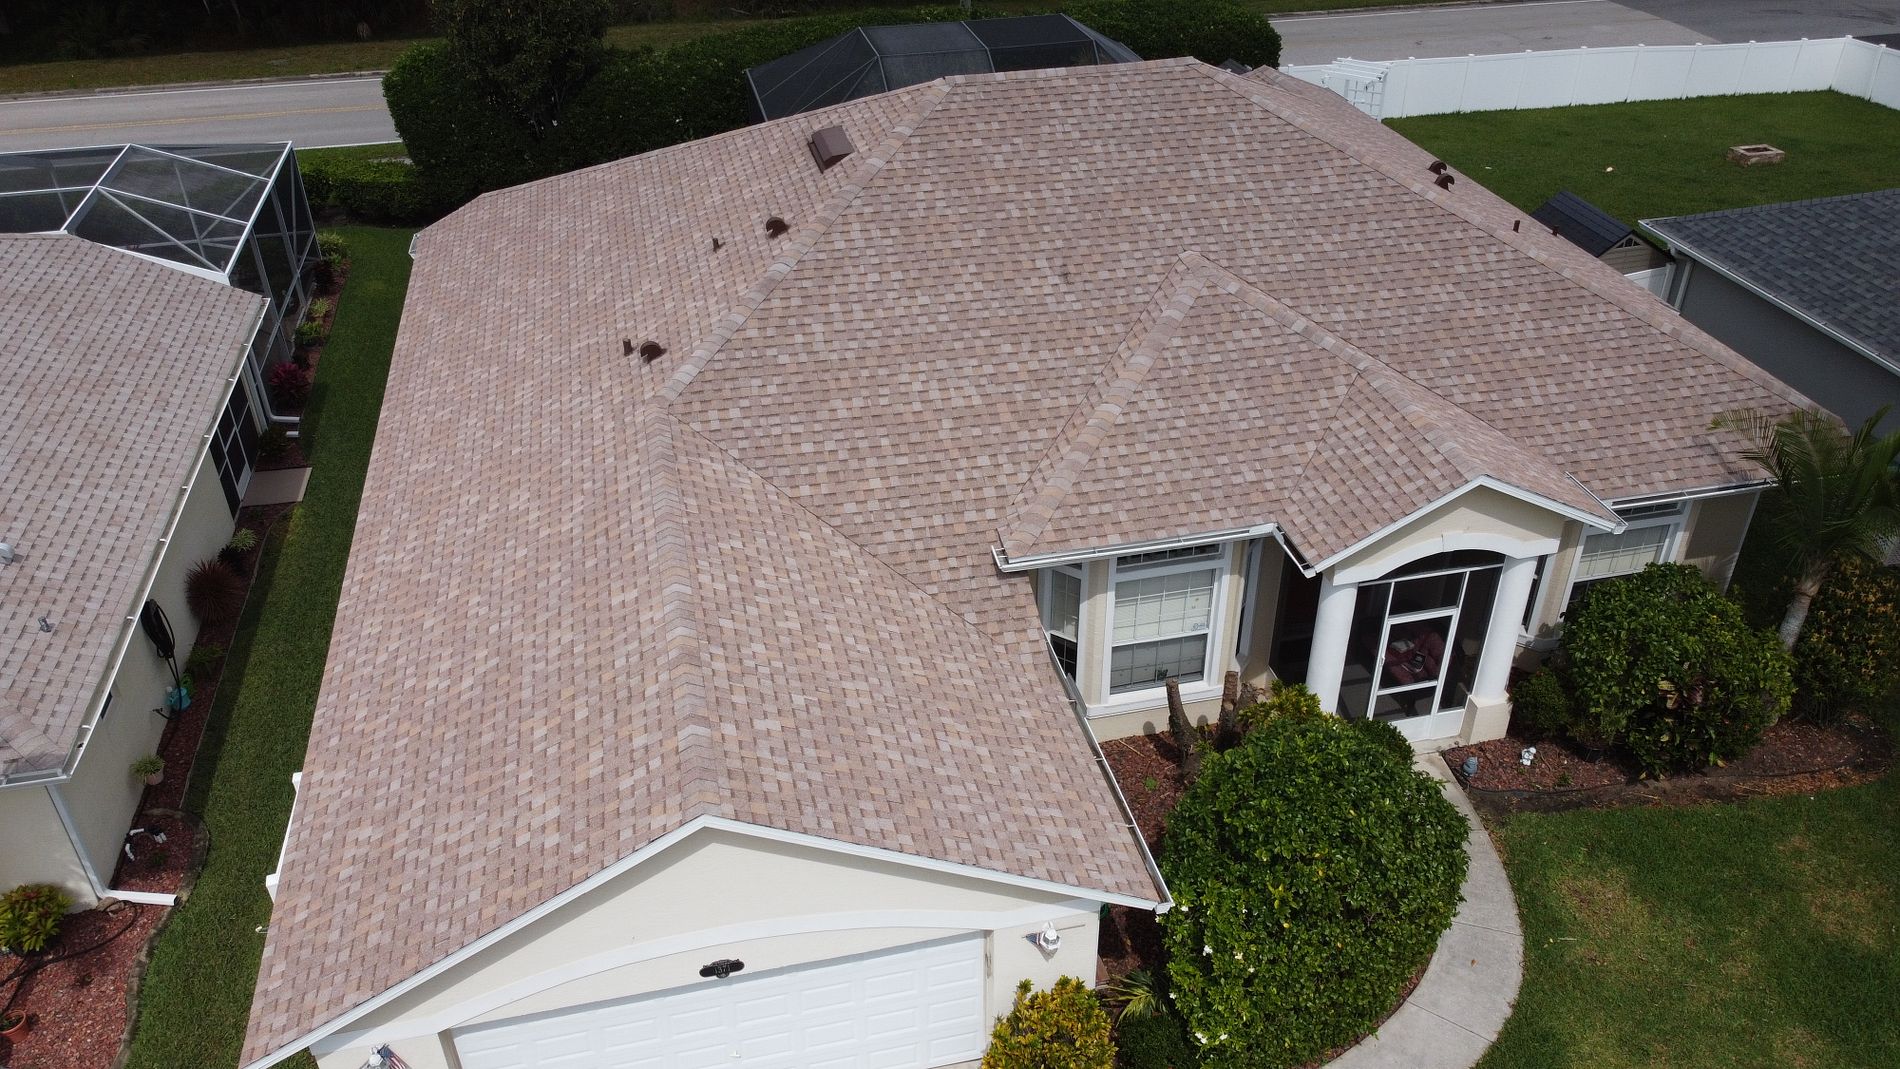 Roof replacement from overhead in Melbourne, FL